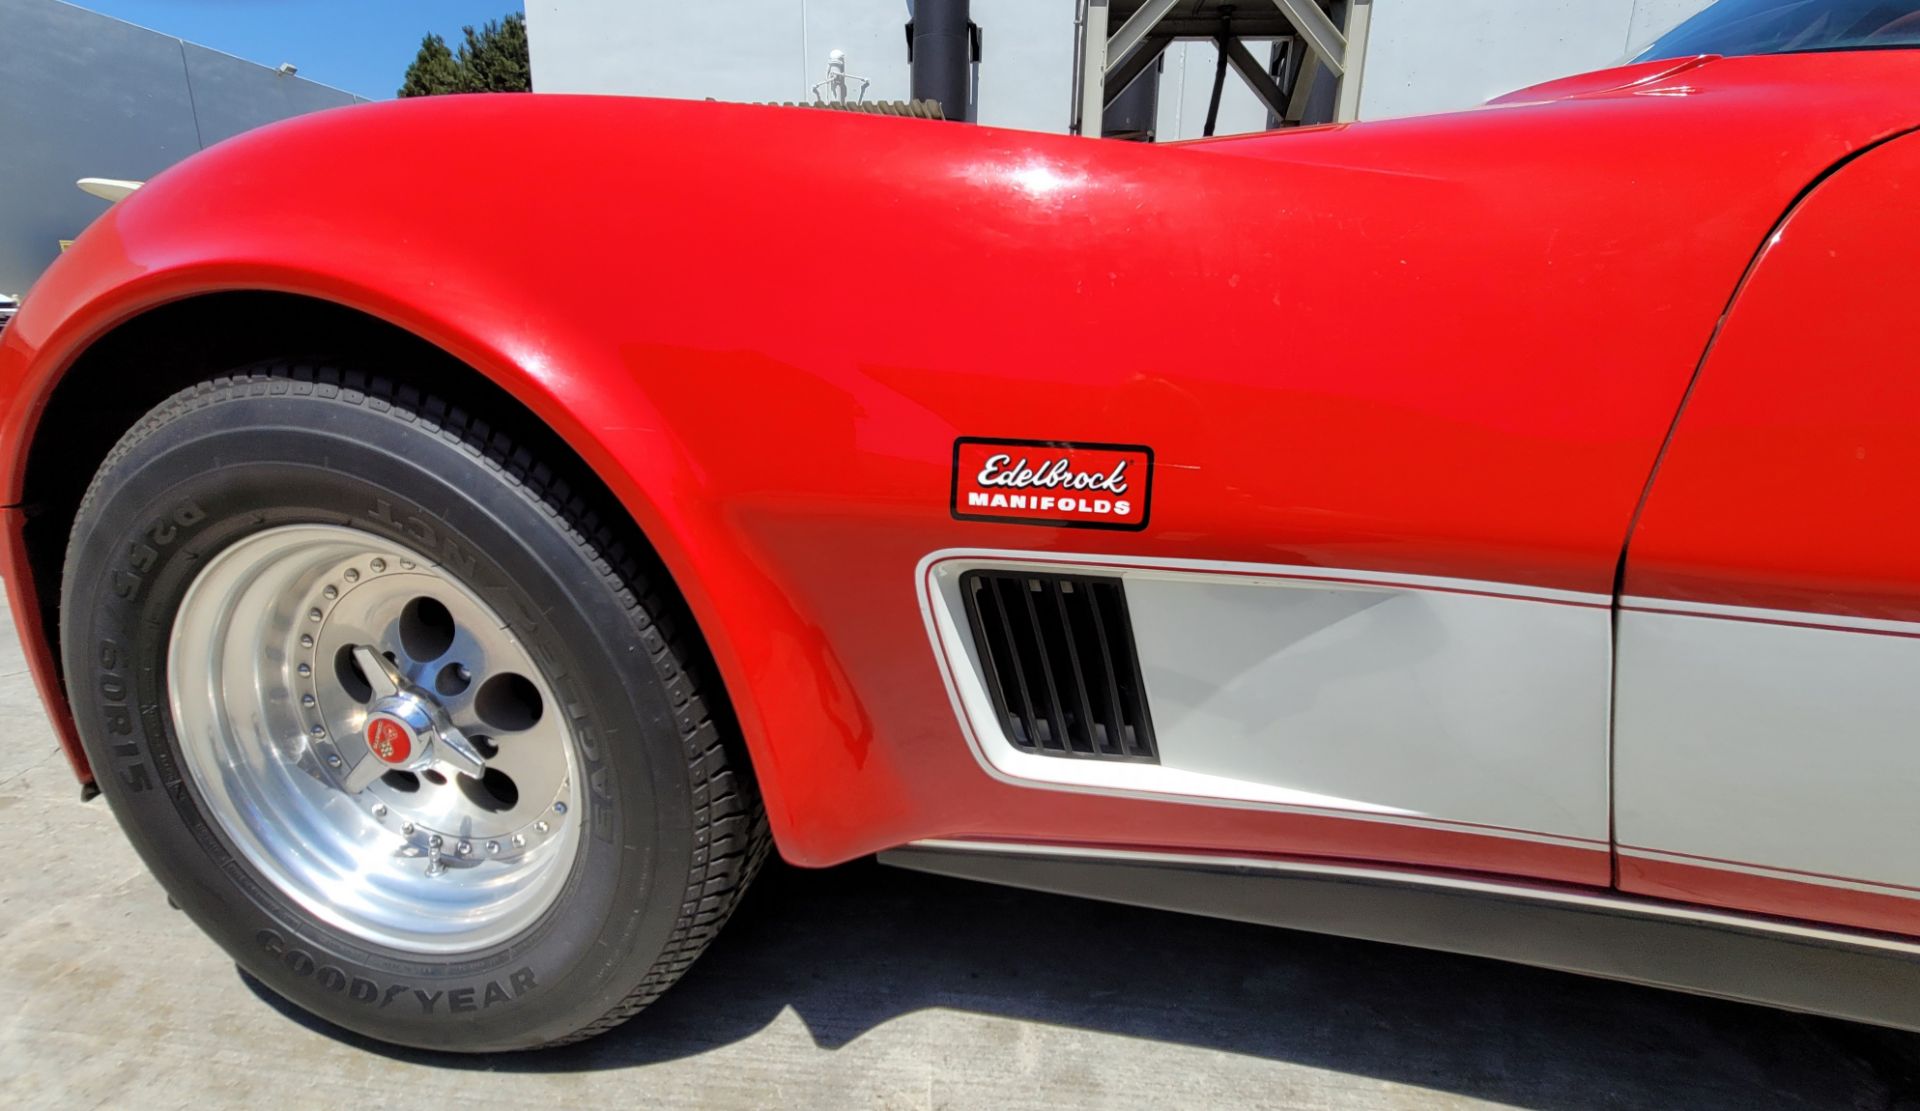 1980 CHEVROLET CORVETTE, WAS VIC EDELBROCK'S PERSONAL CAR BOUGHT FOR R&D, RED INTERIOR, TITLE ONLY. - Image 46 of 70